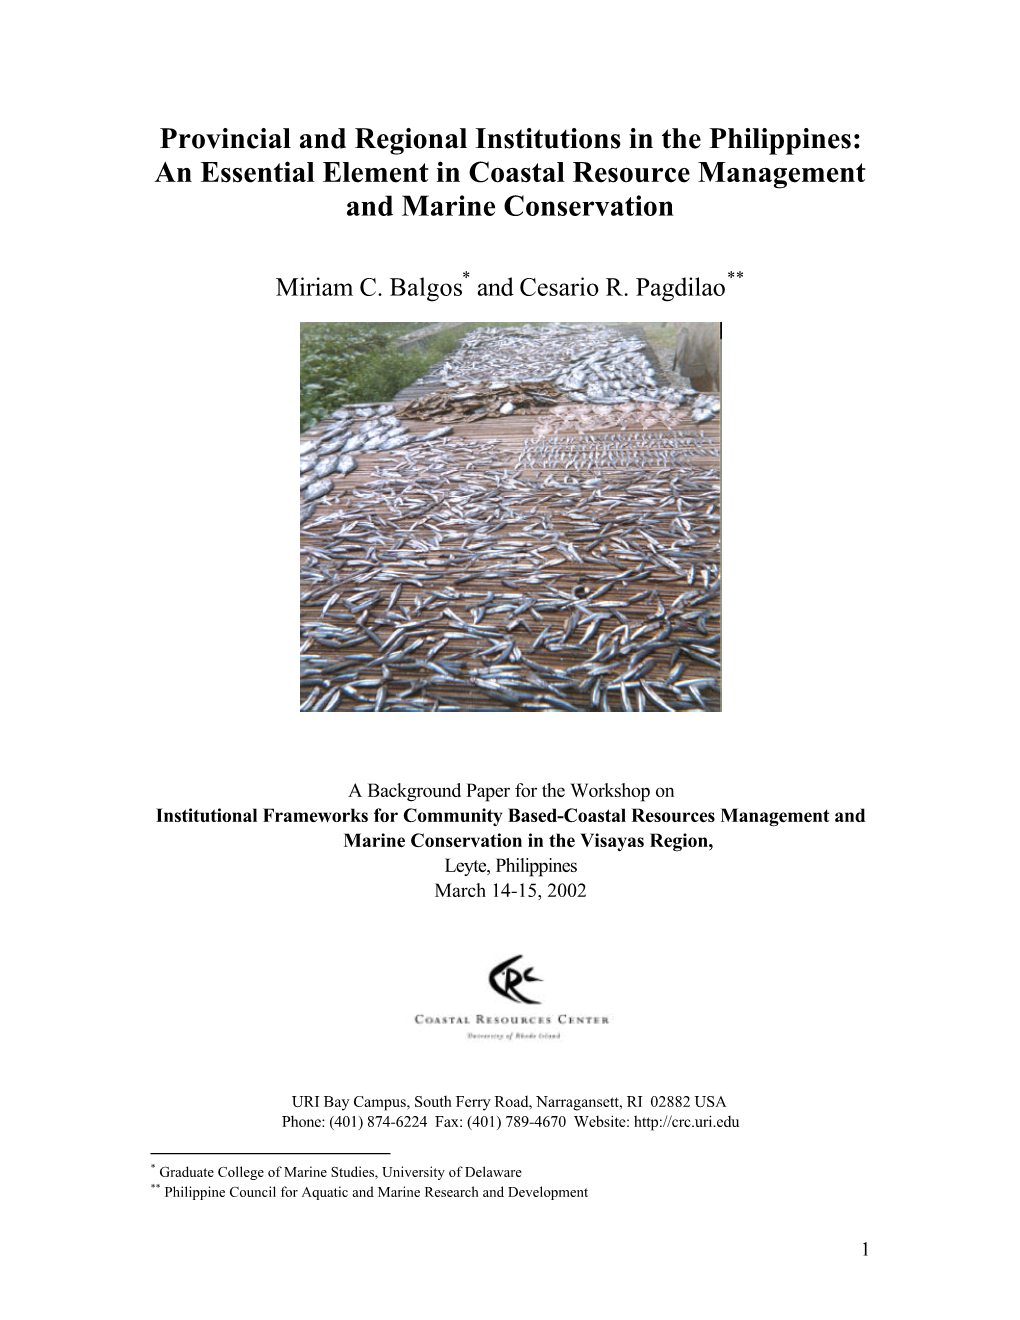 Provincial and Regional Institutions in the Philippines: an Essential Element in Coastal Resource Management and Marine Conservation